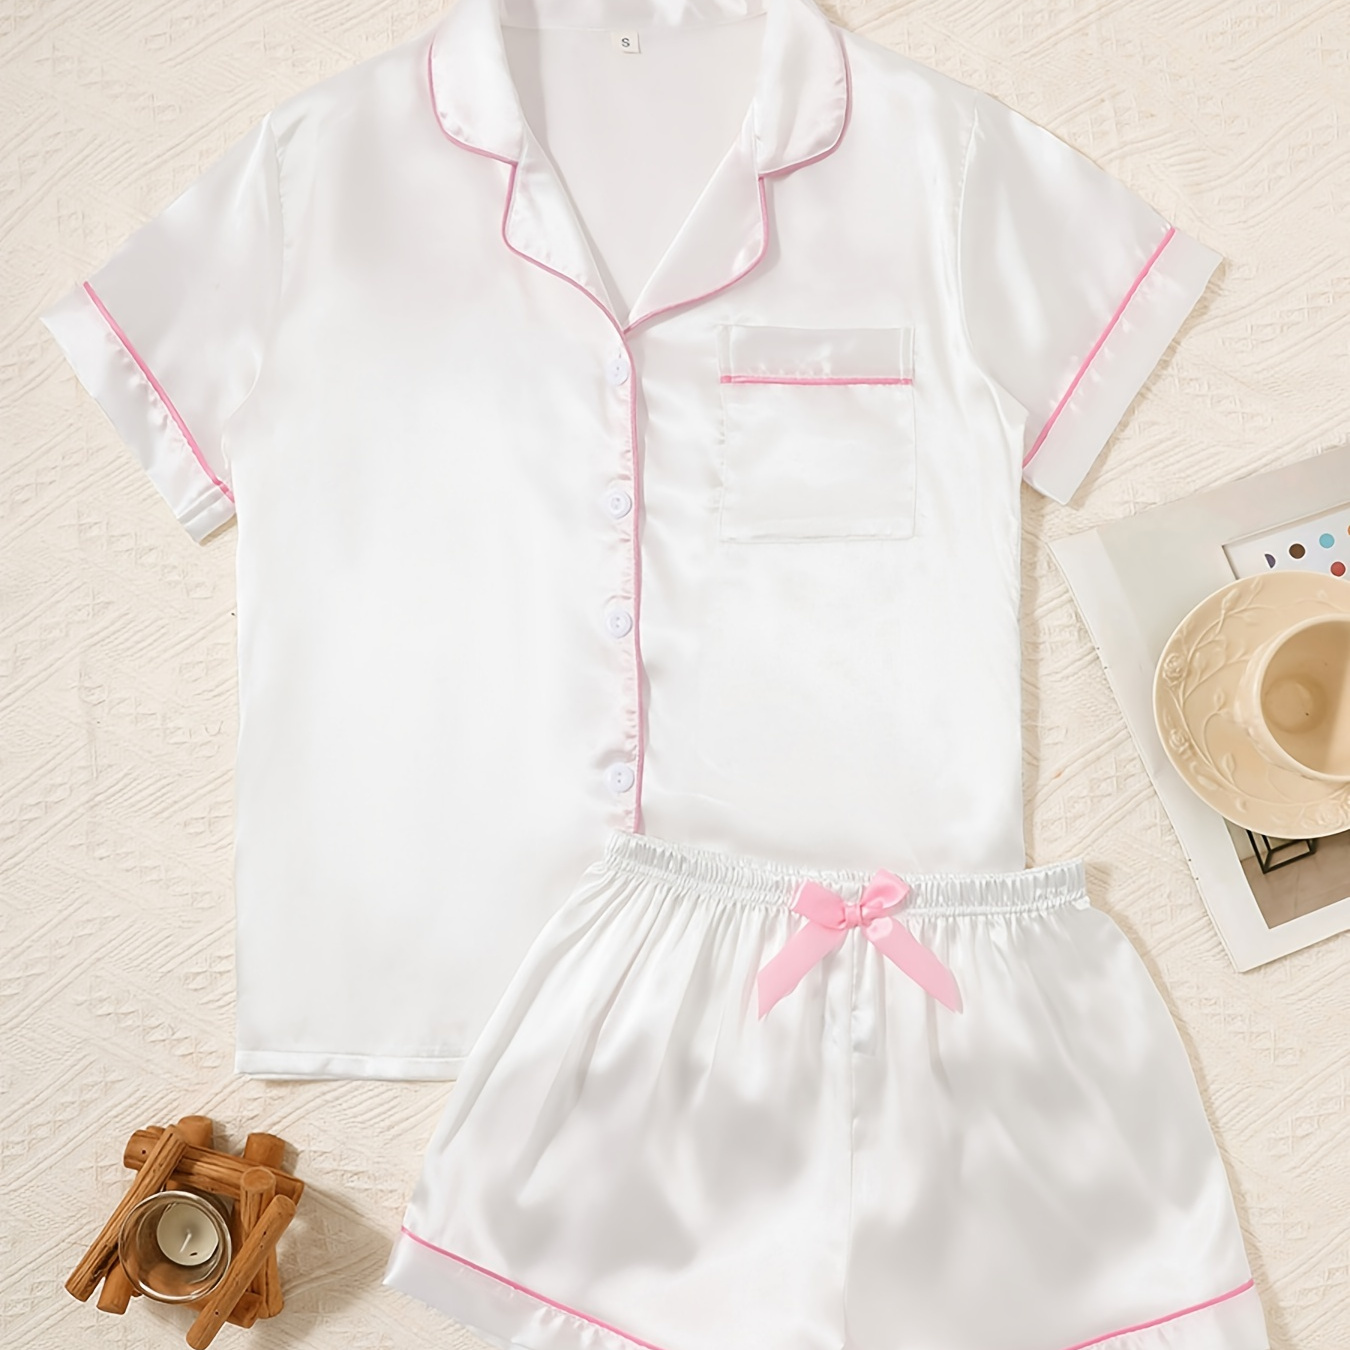 

Women's Solid Satin Casual Pajama Set, Short Sleeve Buttons Lapel Top & Bow Shorts, Comfortable Relaxed Fit